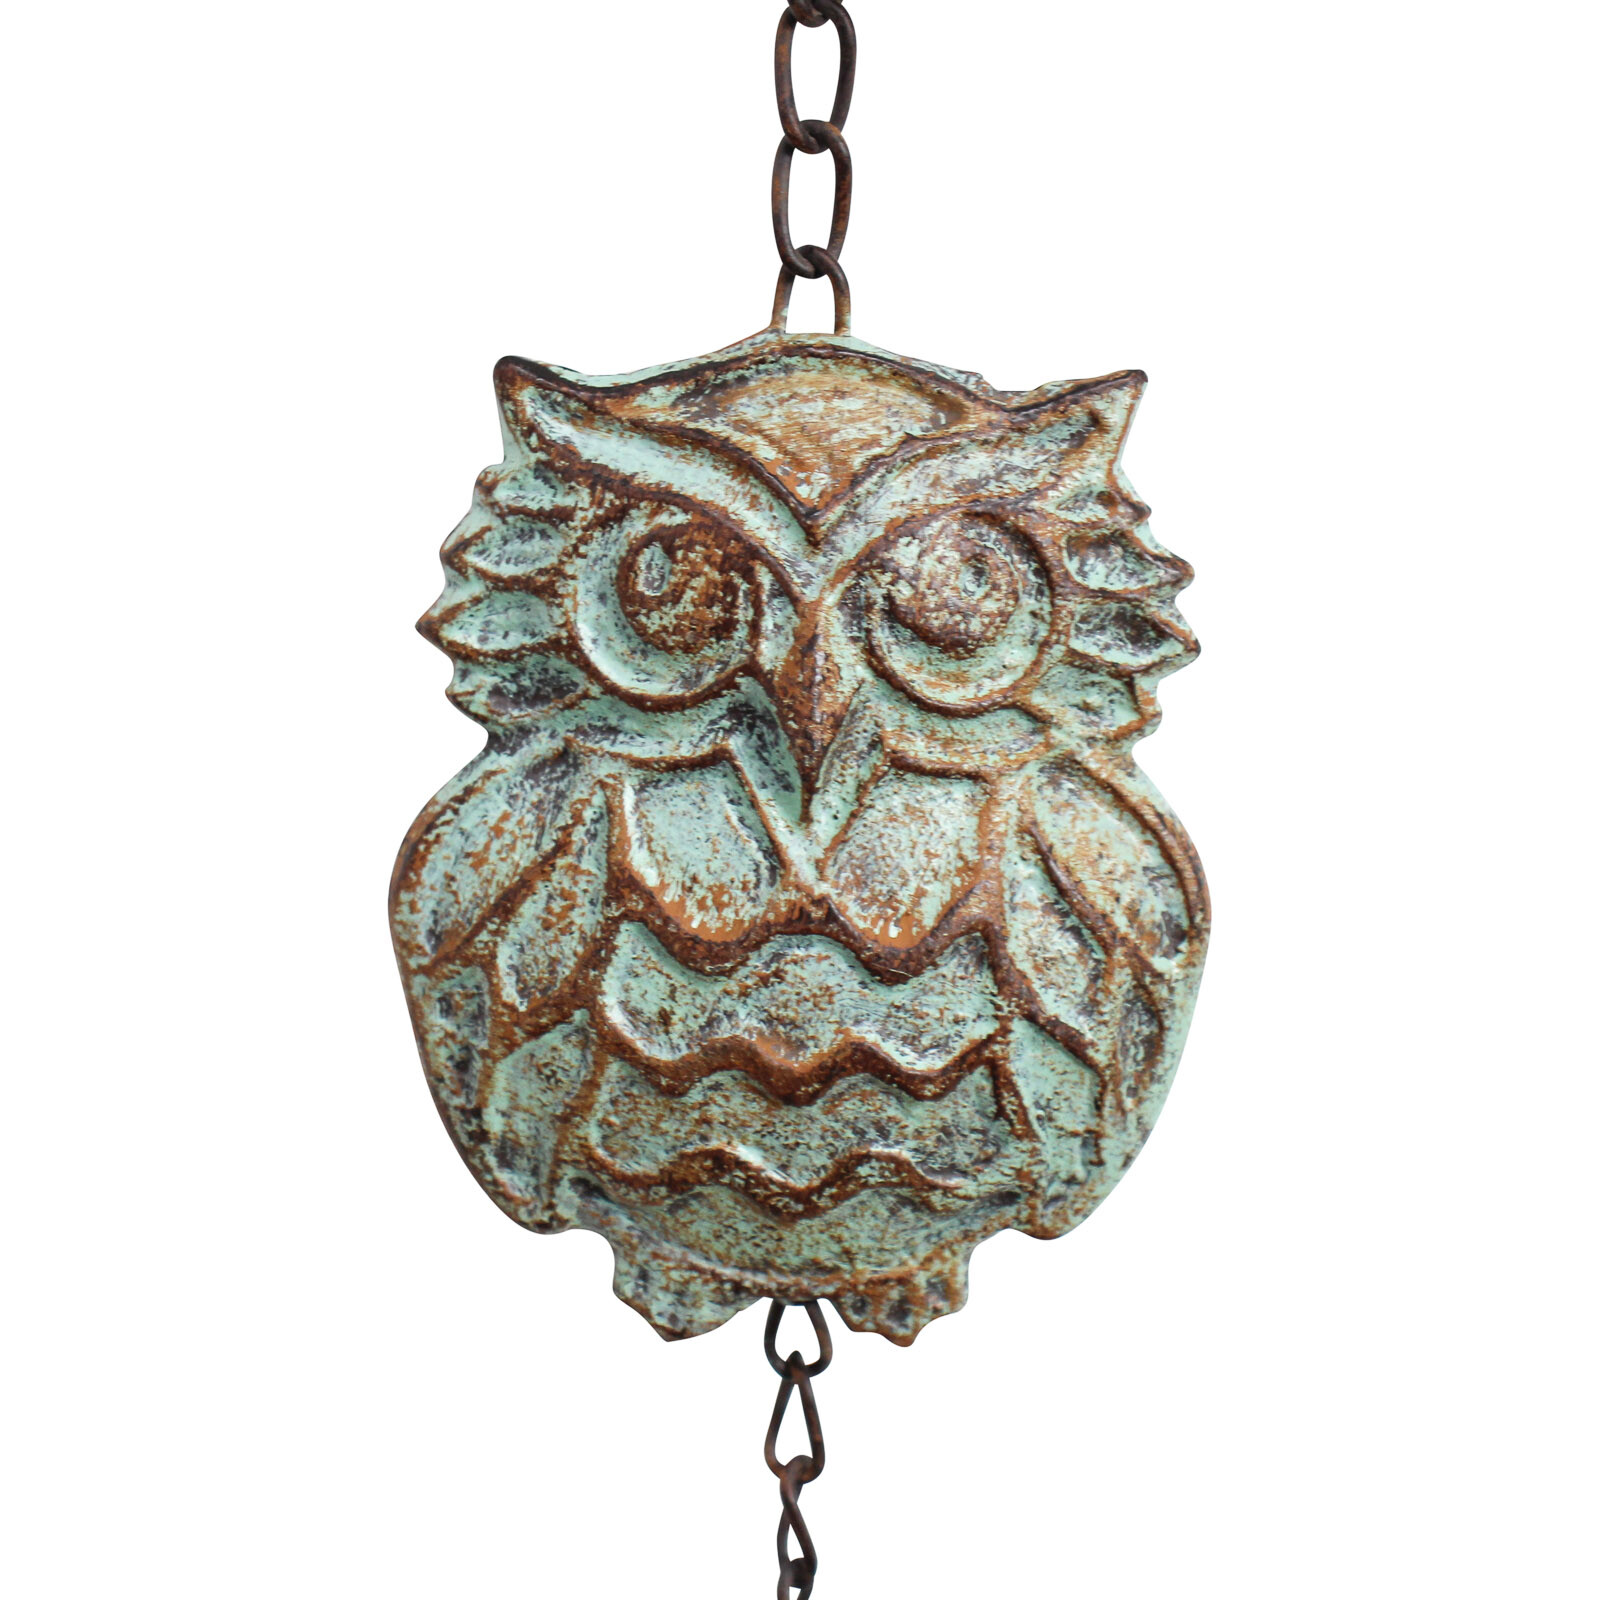 Hanging Bell Owl